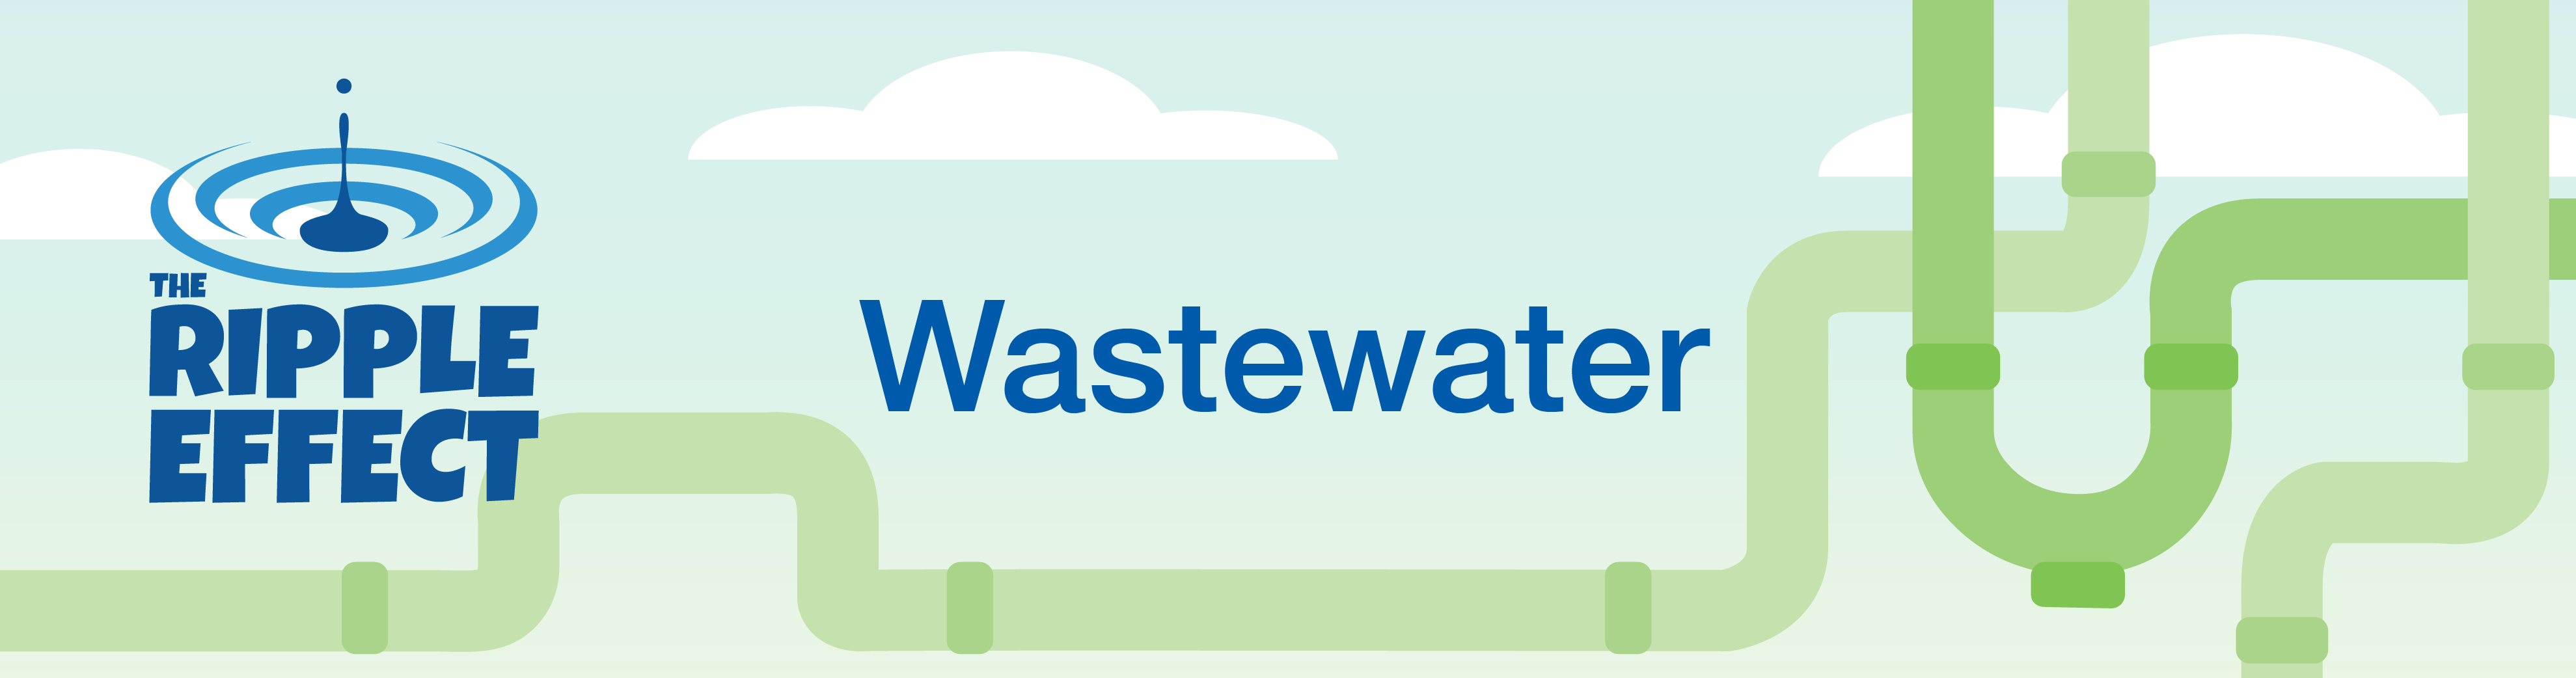 The Ripple Effect: Wastewater